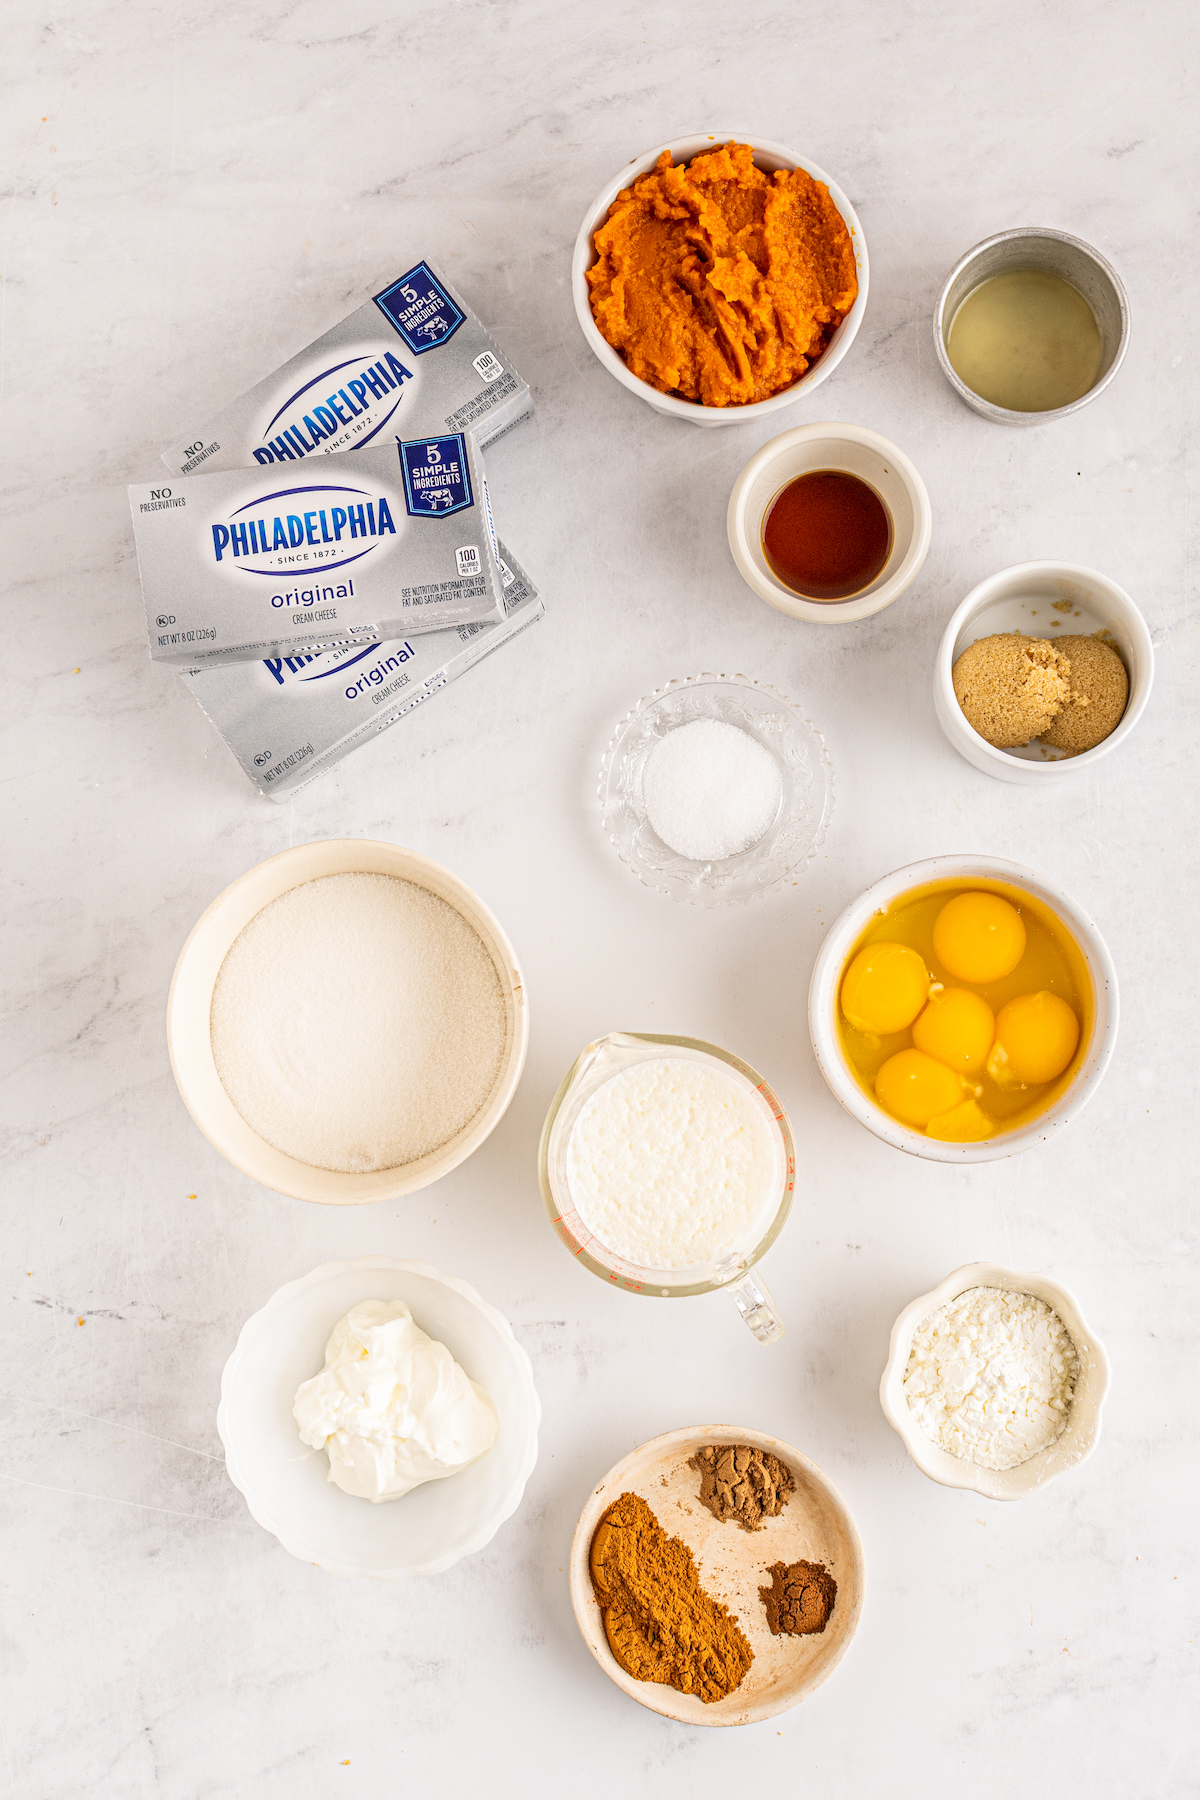 a countertop with cream cheese packages and prep bowls with ingredients to make cheesecake